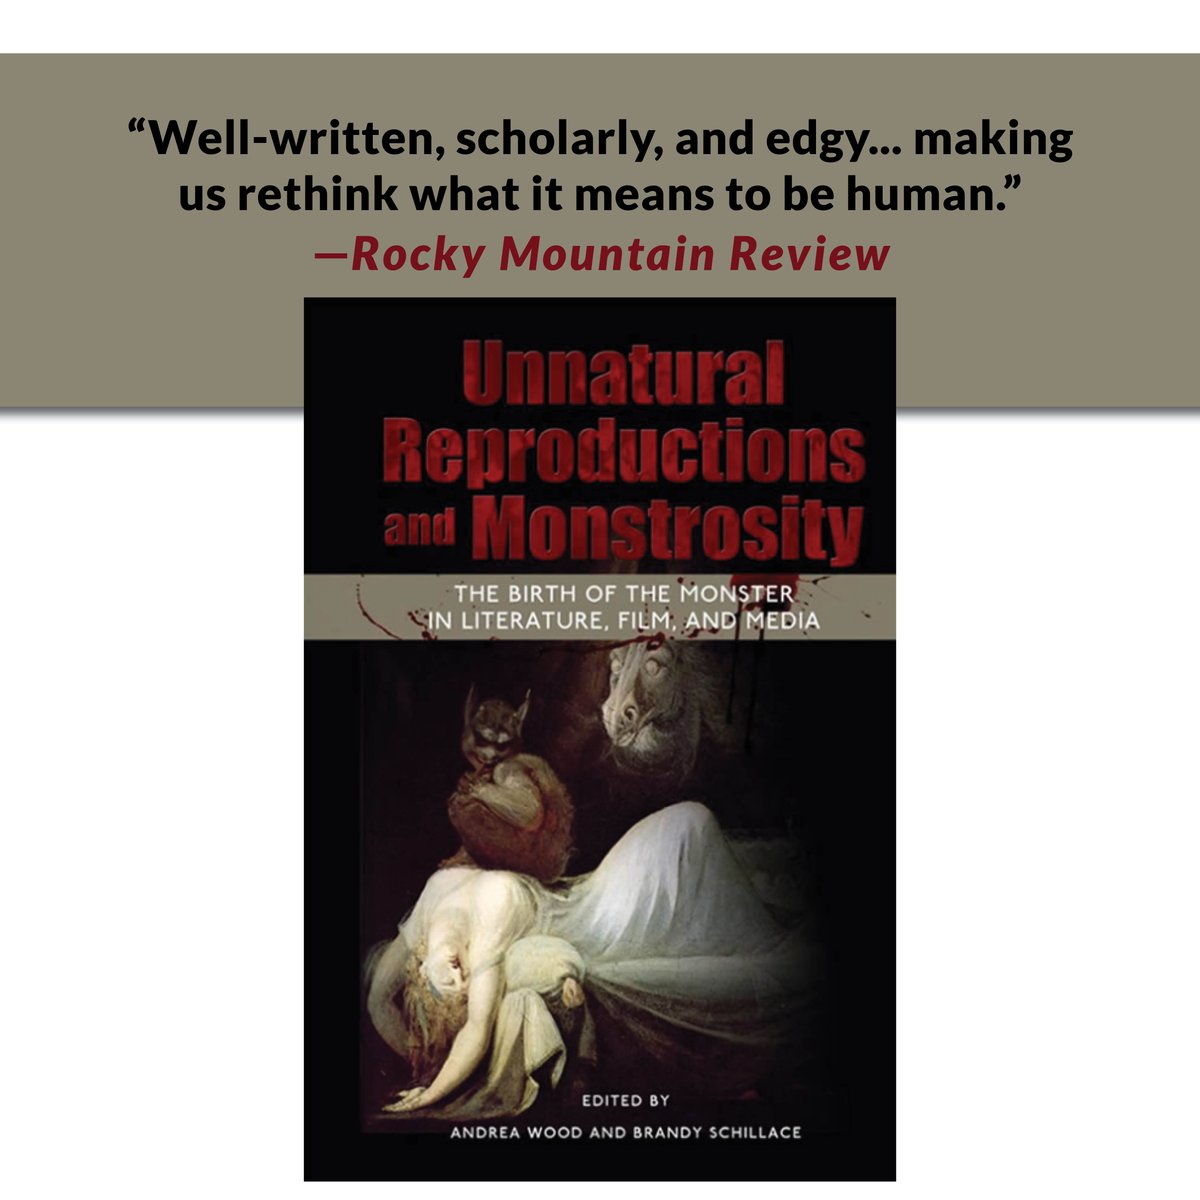 'A more thorough treatment & ethical query of reproductive monstrosity & unnatural parturition. In this regard, how women, maternity, & motherhood are treated in literature, film, & media are especially scrutinized and evaluated...' —Rocky Mountain Review cambriapress.com/pub.cfm?bid=602